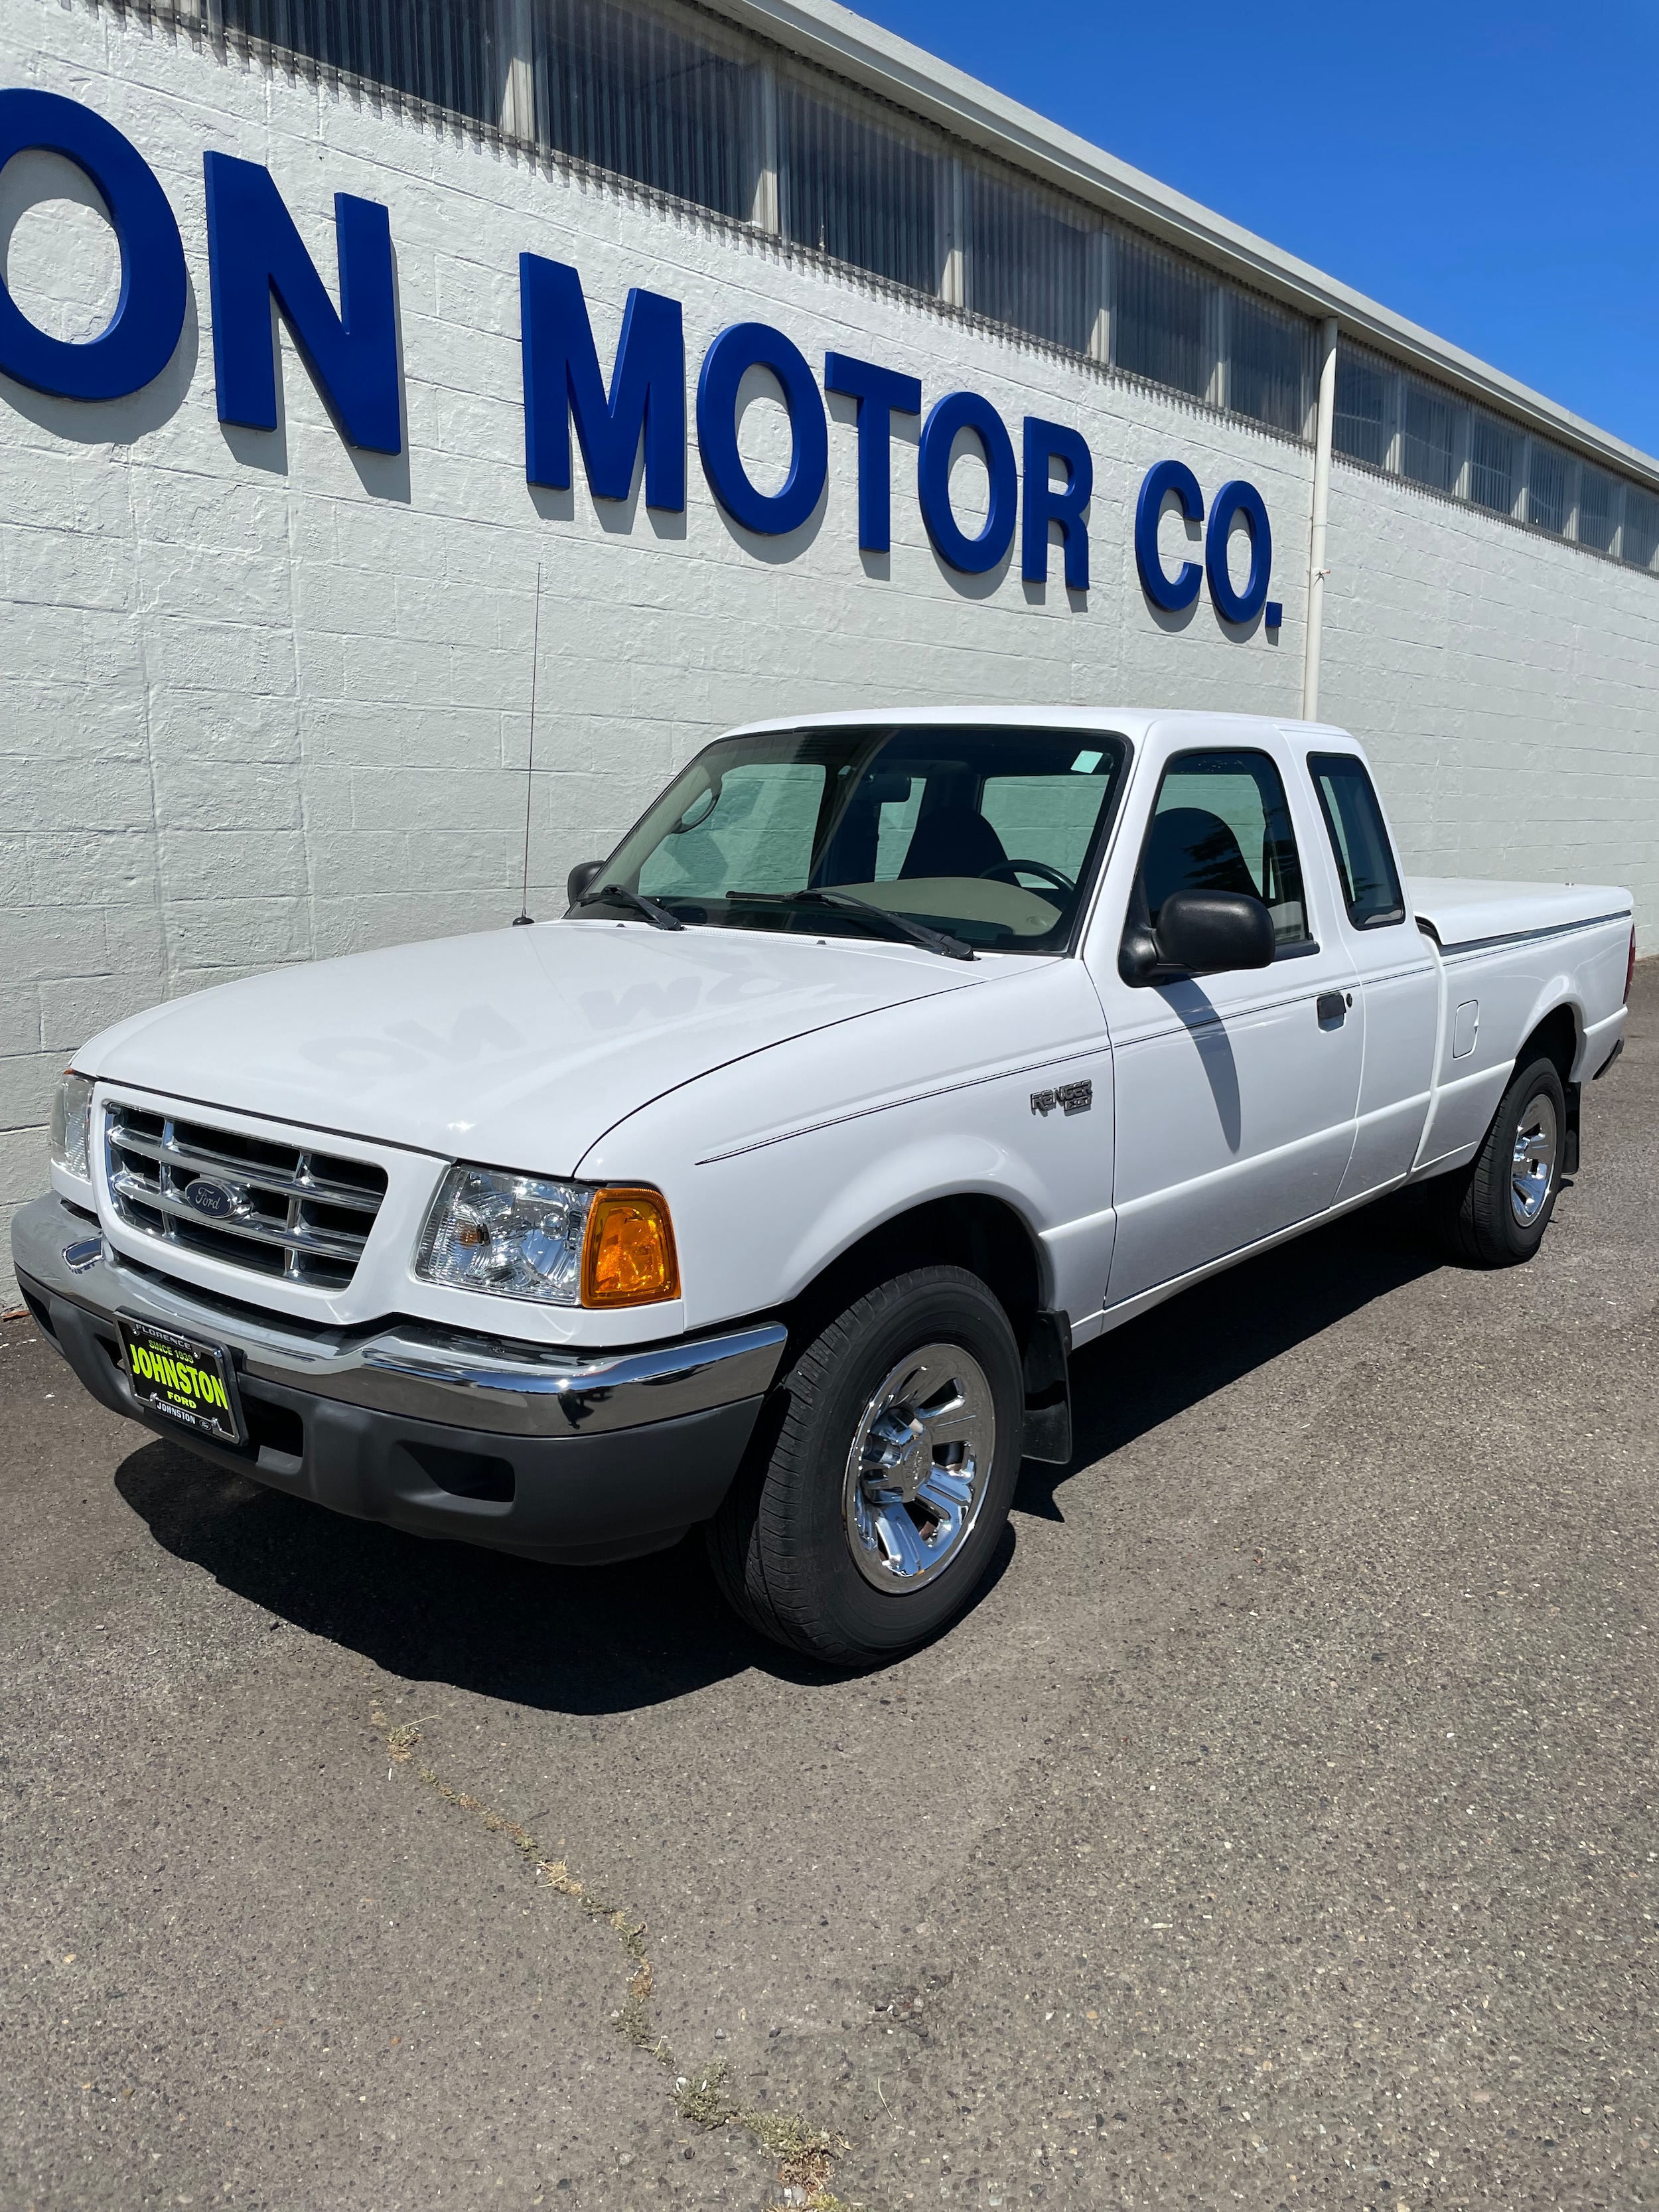 Used 2003 Ford Ranger XLT with VIN 1FTYR14U13PA31362 for sale in Florence, OR